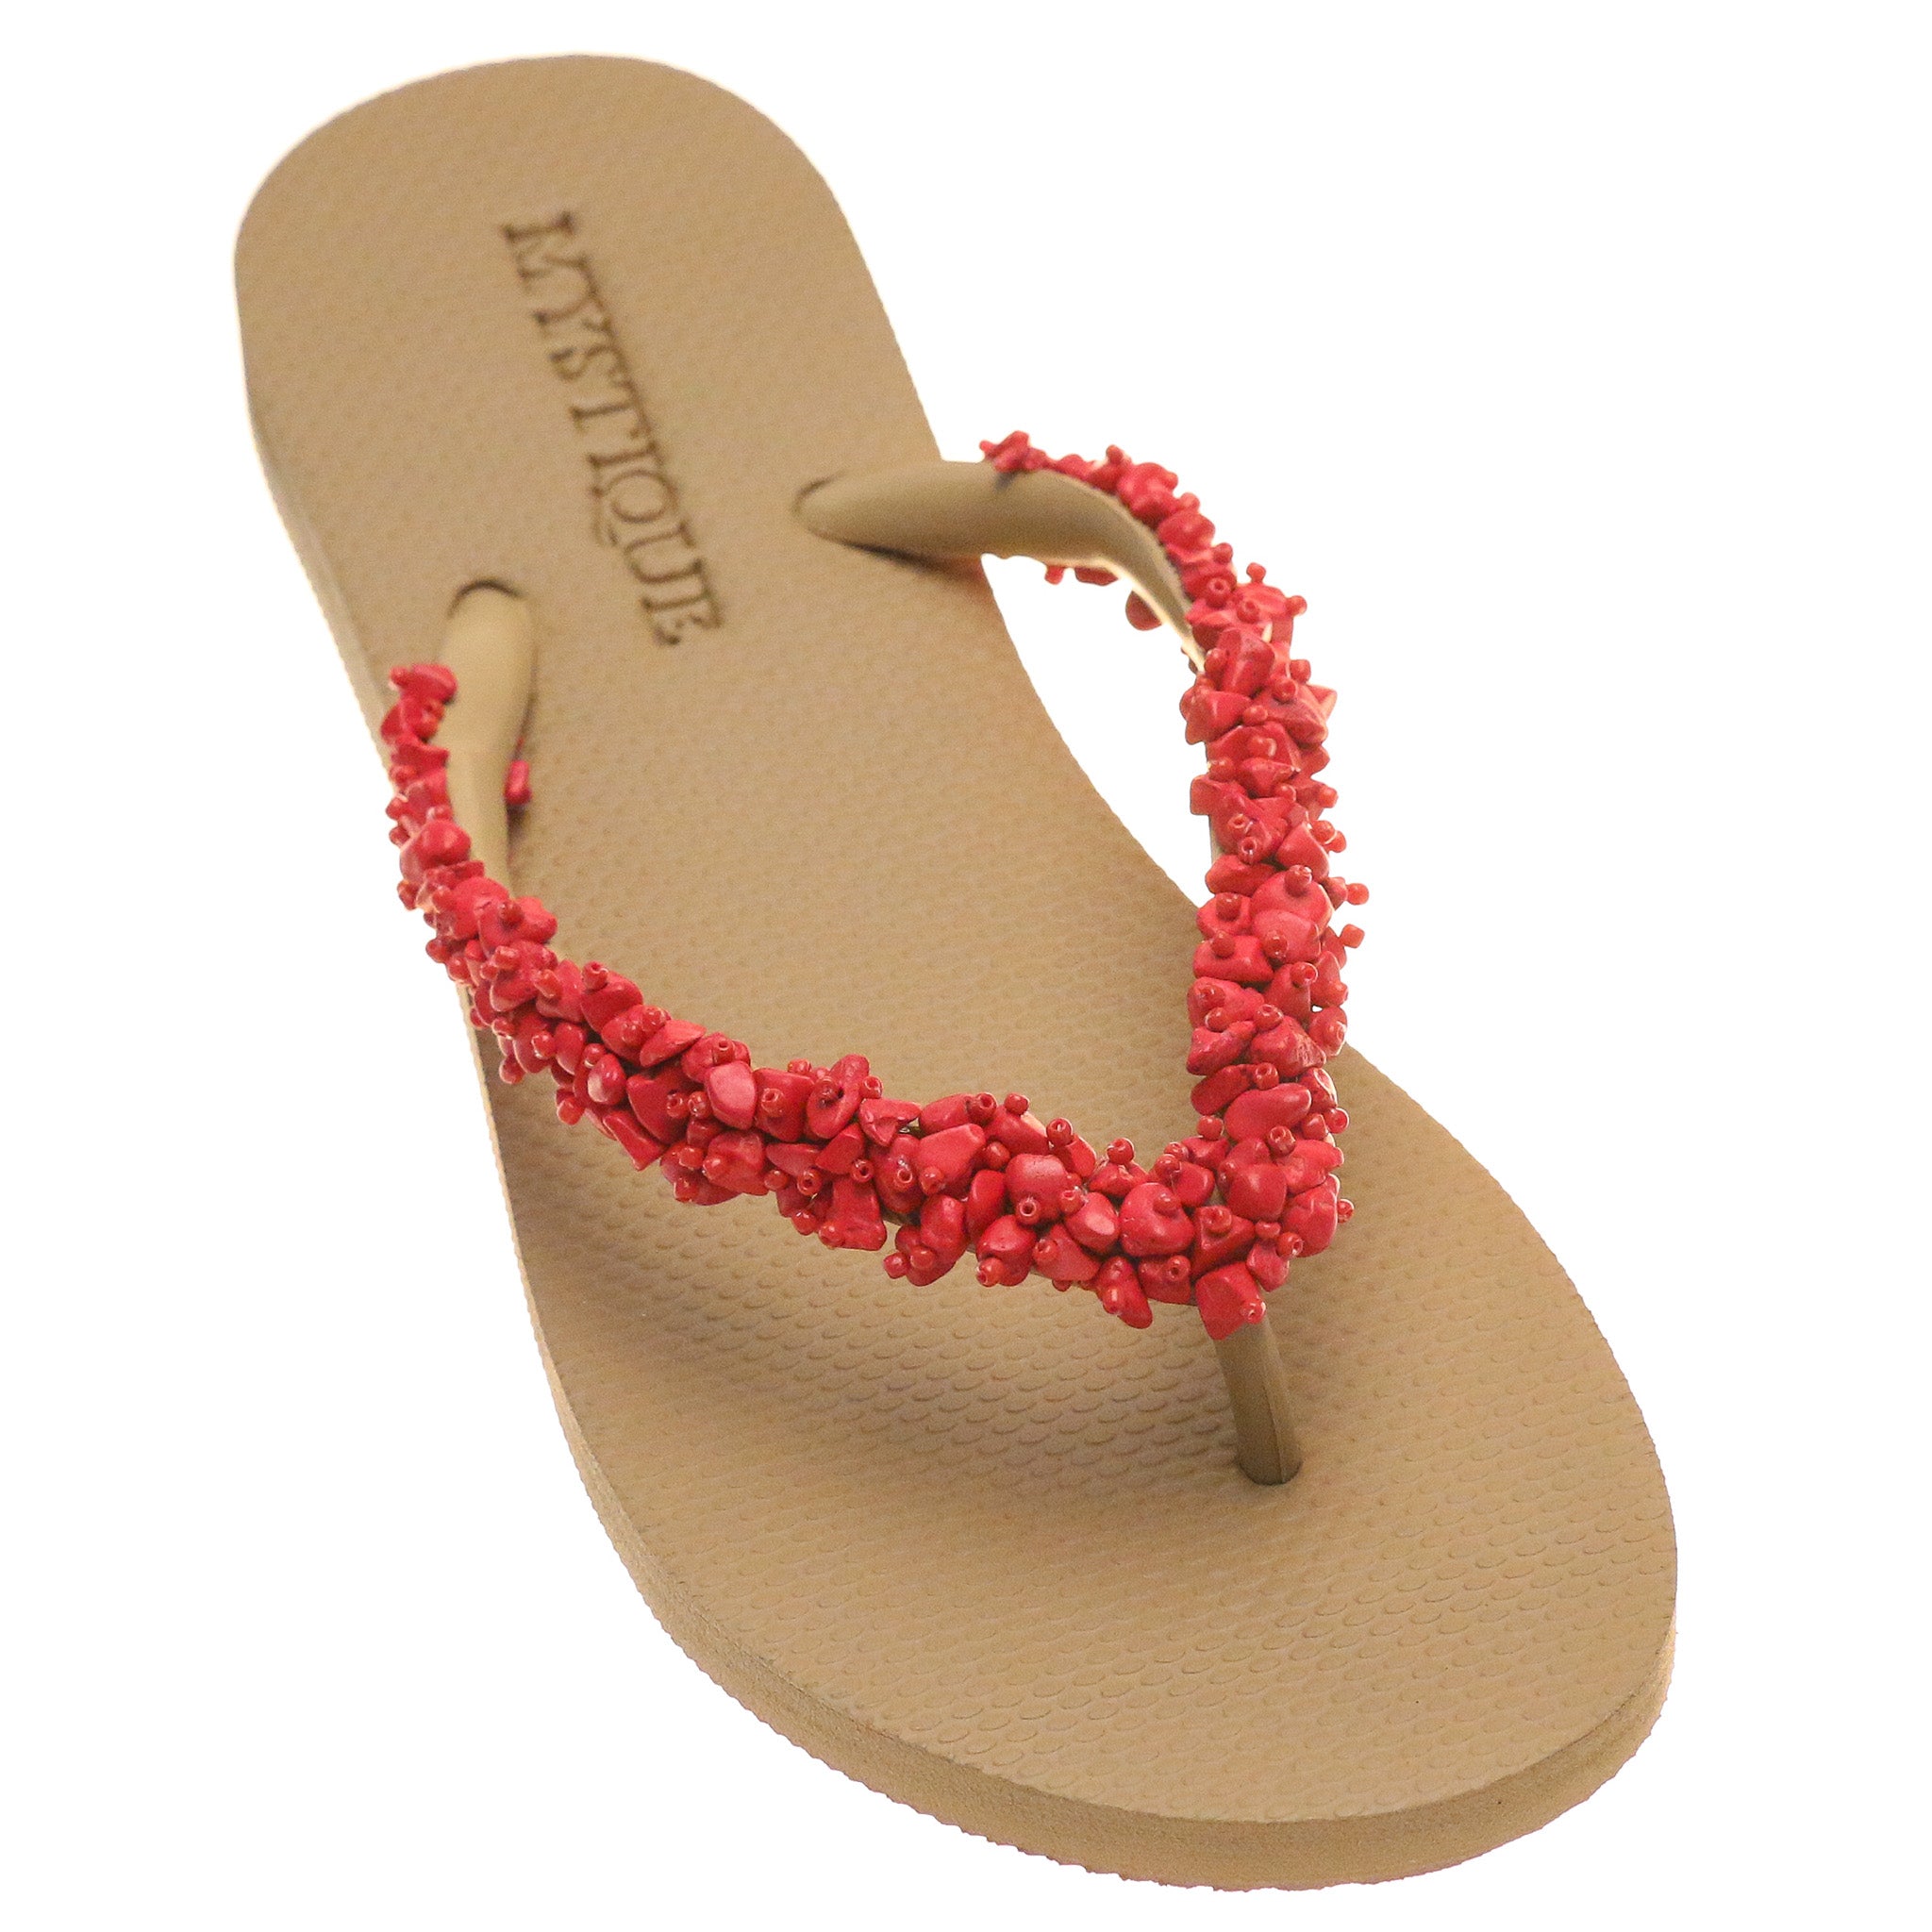 Coral Bay- Women's Beachy Coral Jeweled Flip Flops | Mystique Sandals